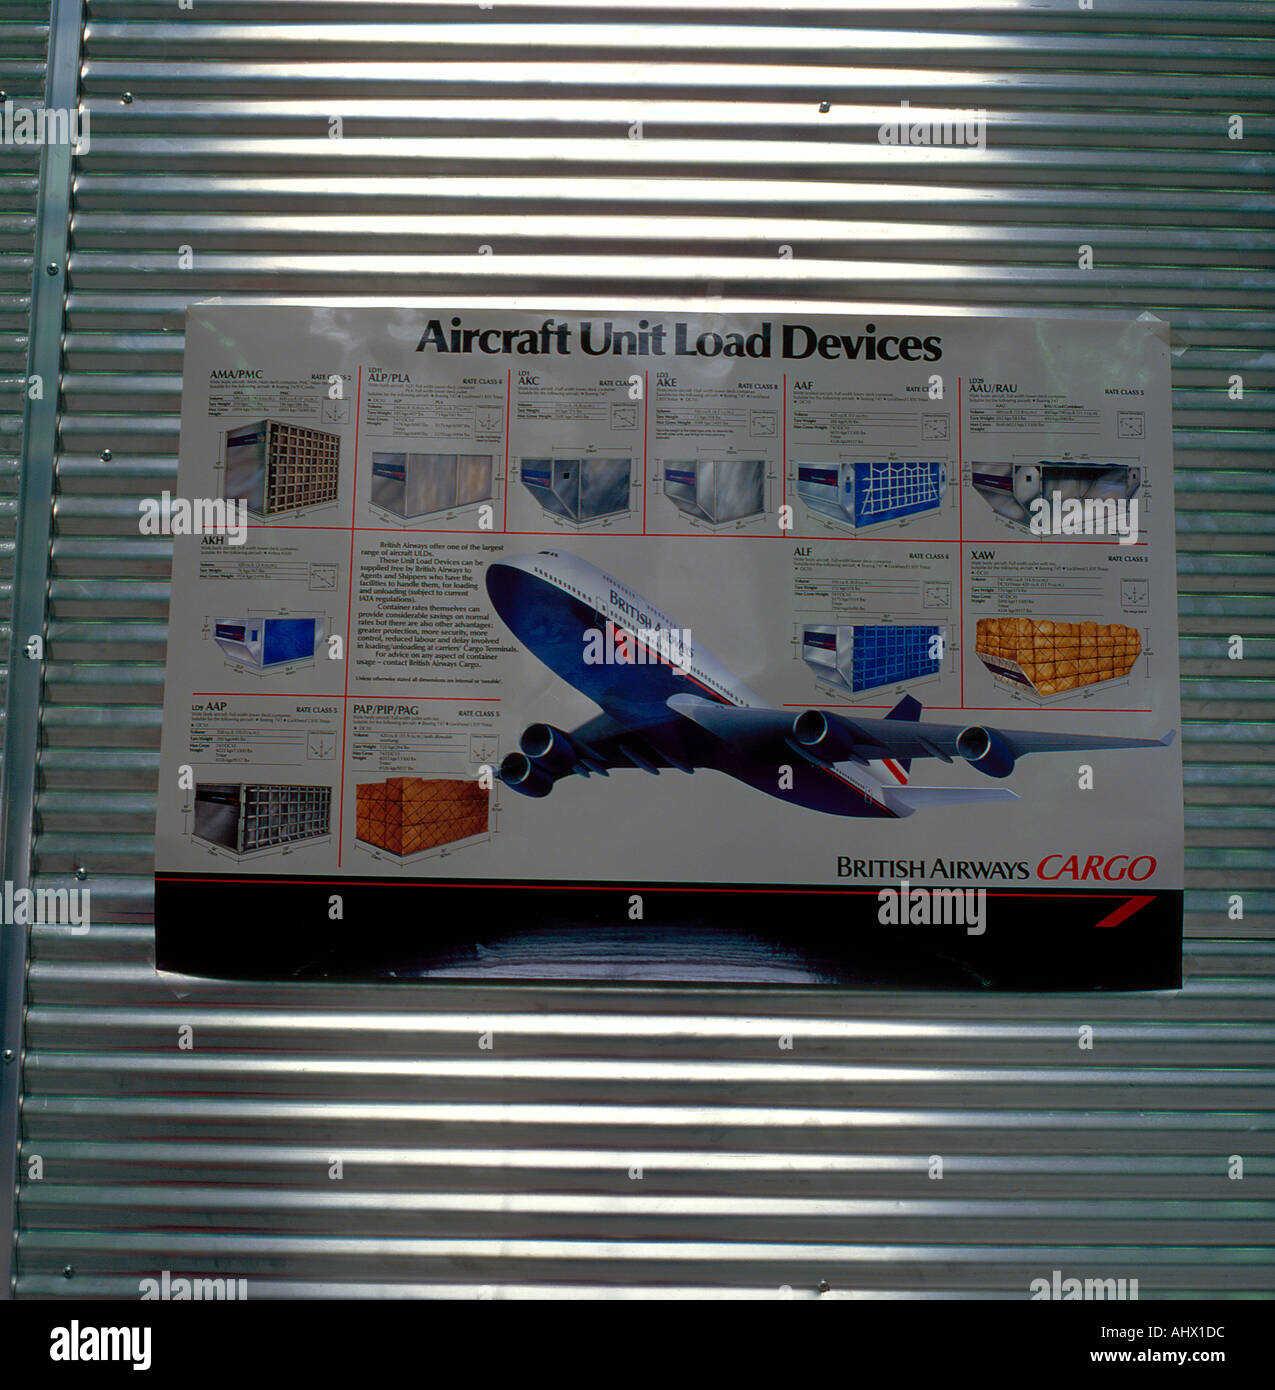 poster of aircraft unit load devices at munich airport, Bavaria, Germany, Europe. Photo by Willy Matheisl Stock Photo